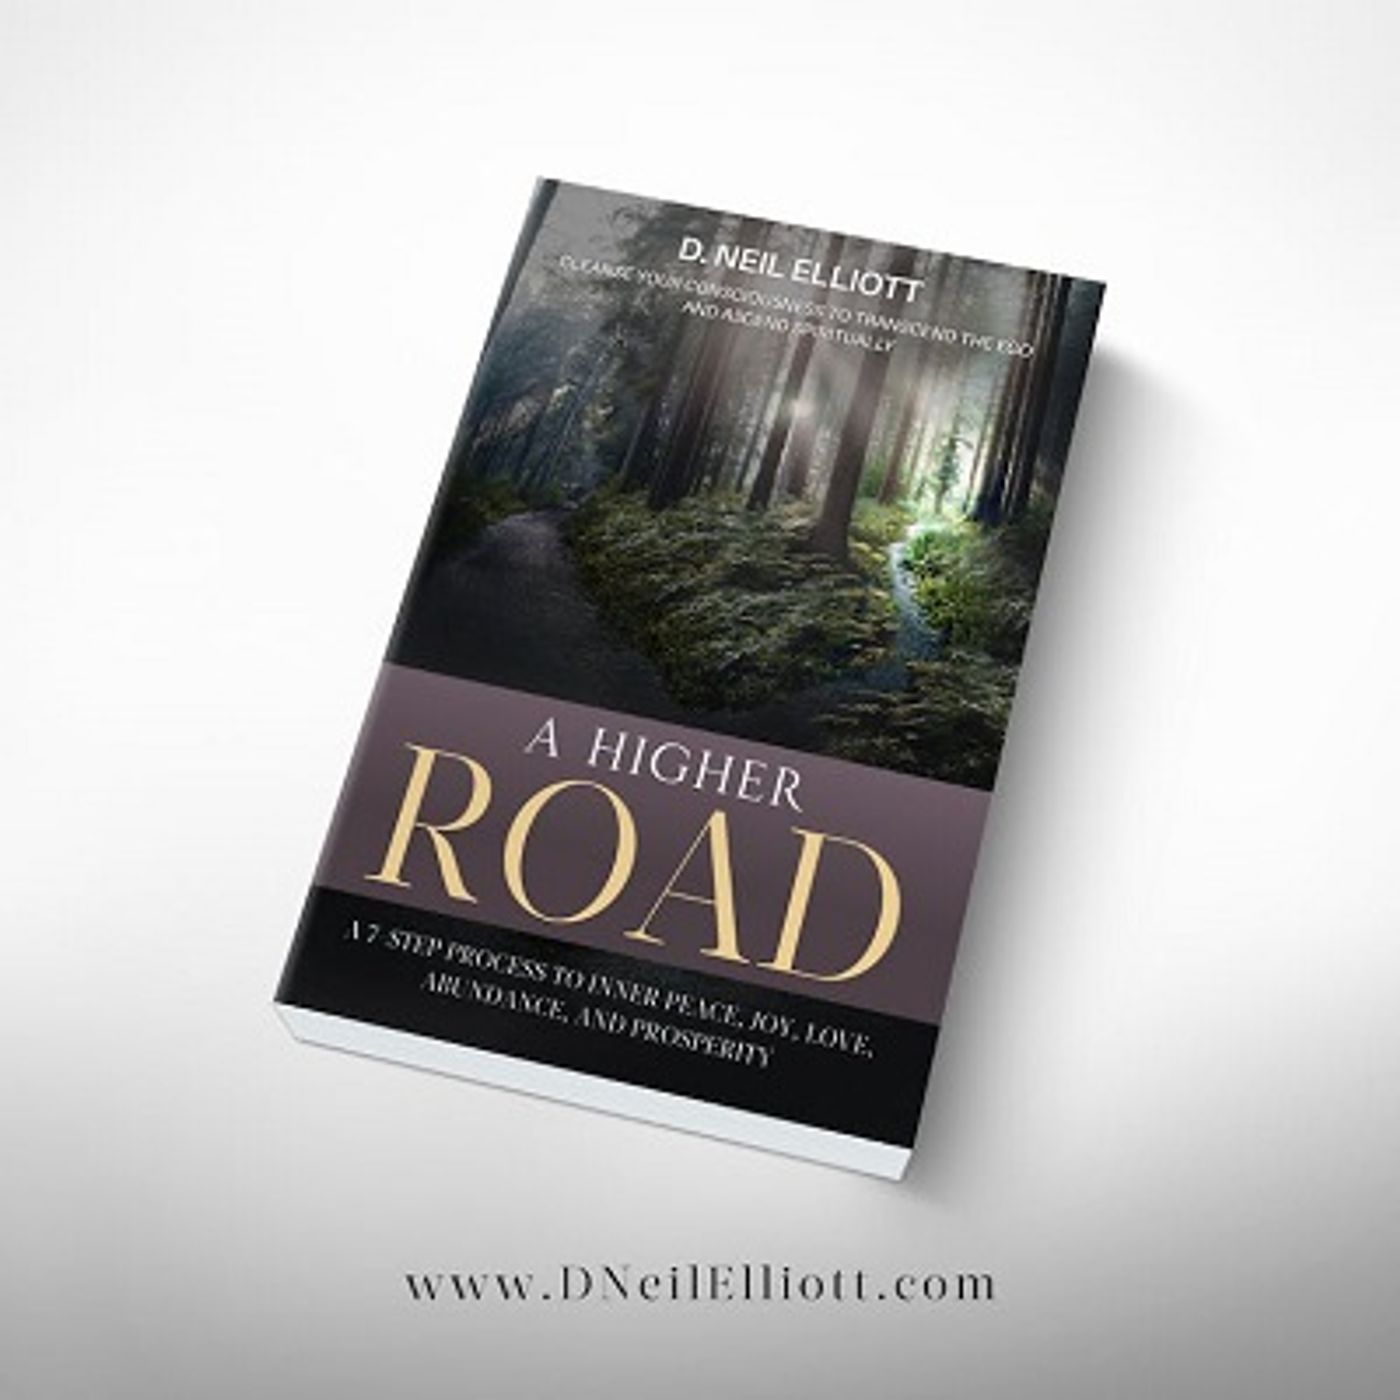 P4T 6-13 "A HIGHER ROAD" with D NEIL ELLIOTT